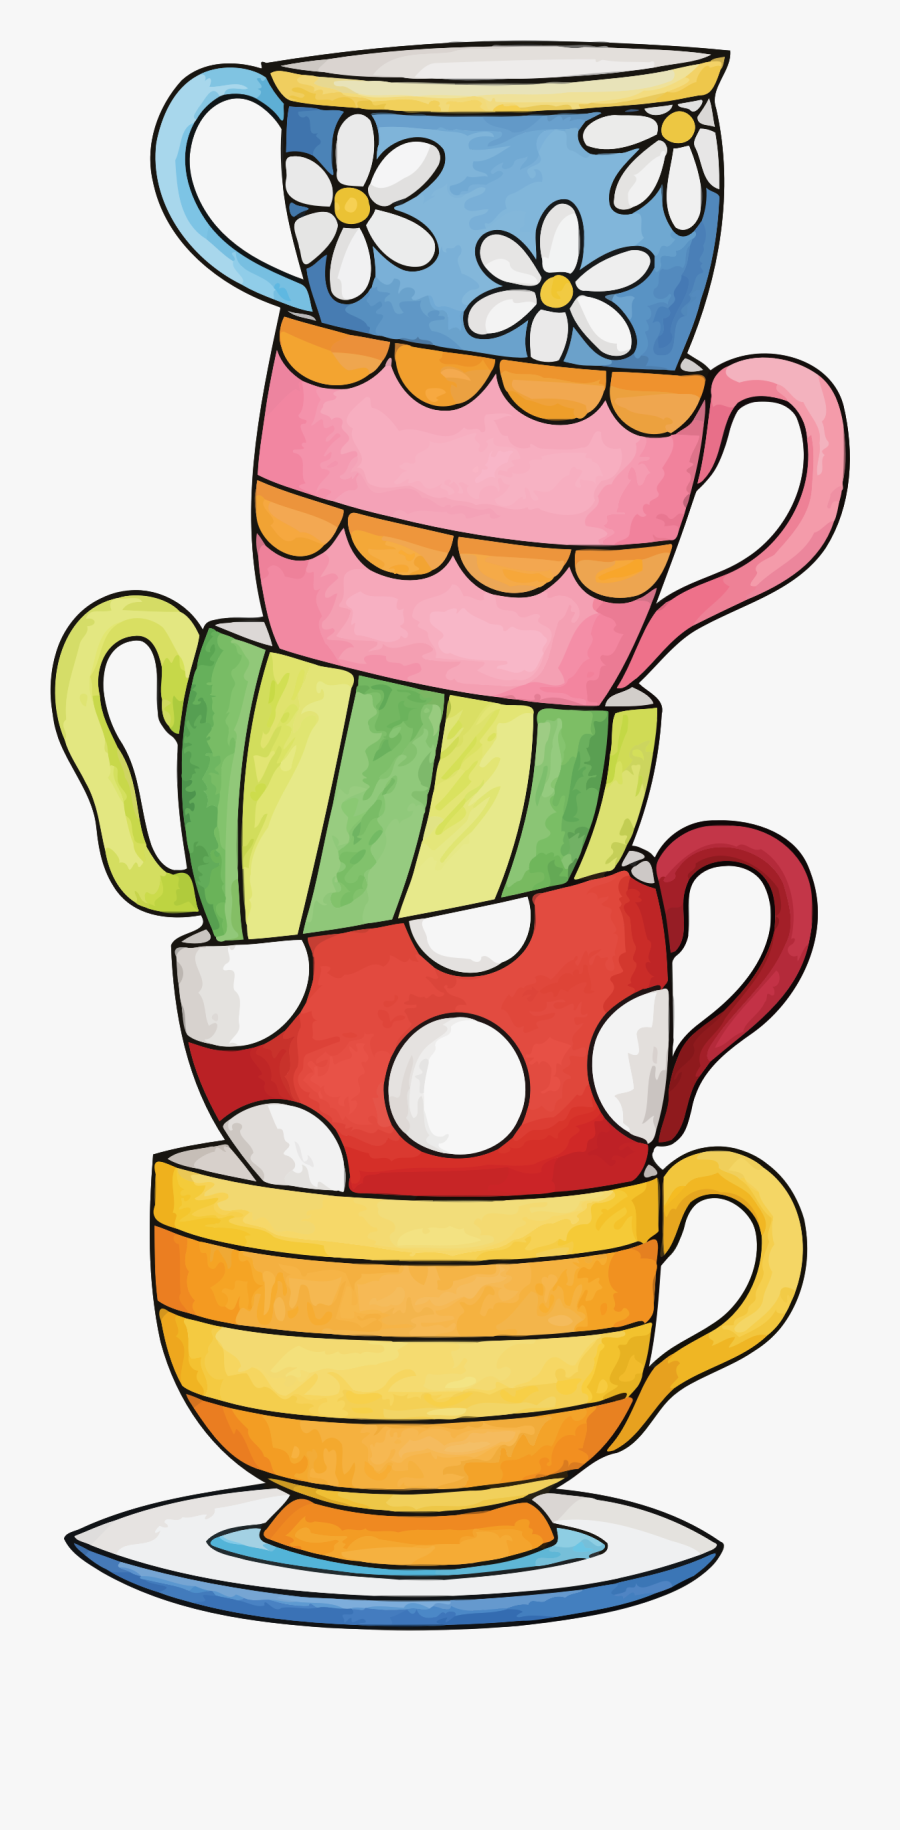 Clipart - Stacked Tea Cups Clipart, Transparent Clipart